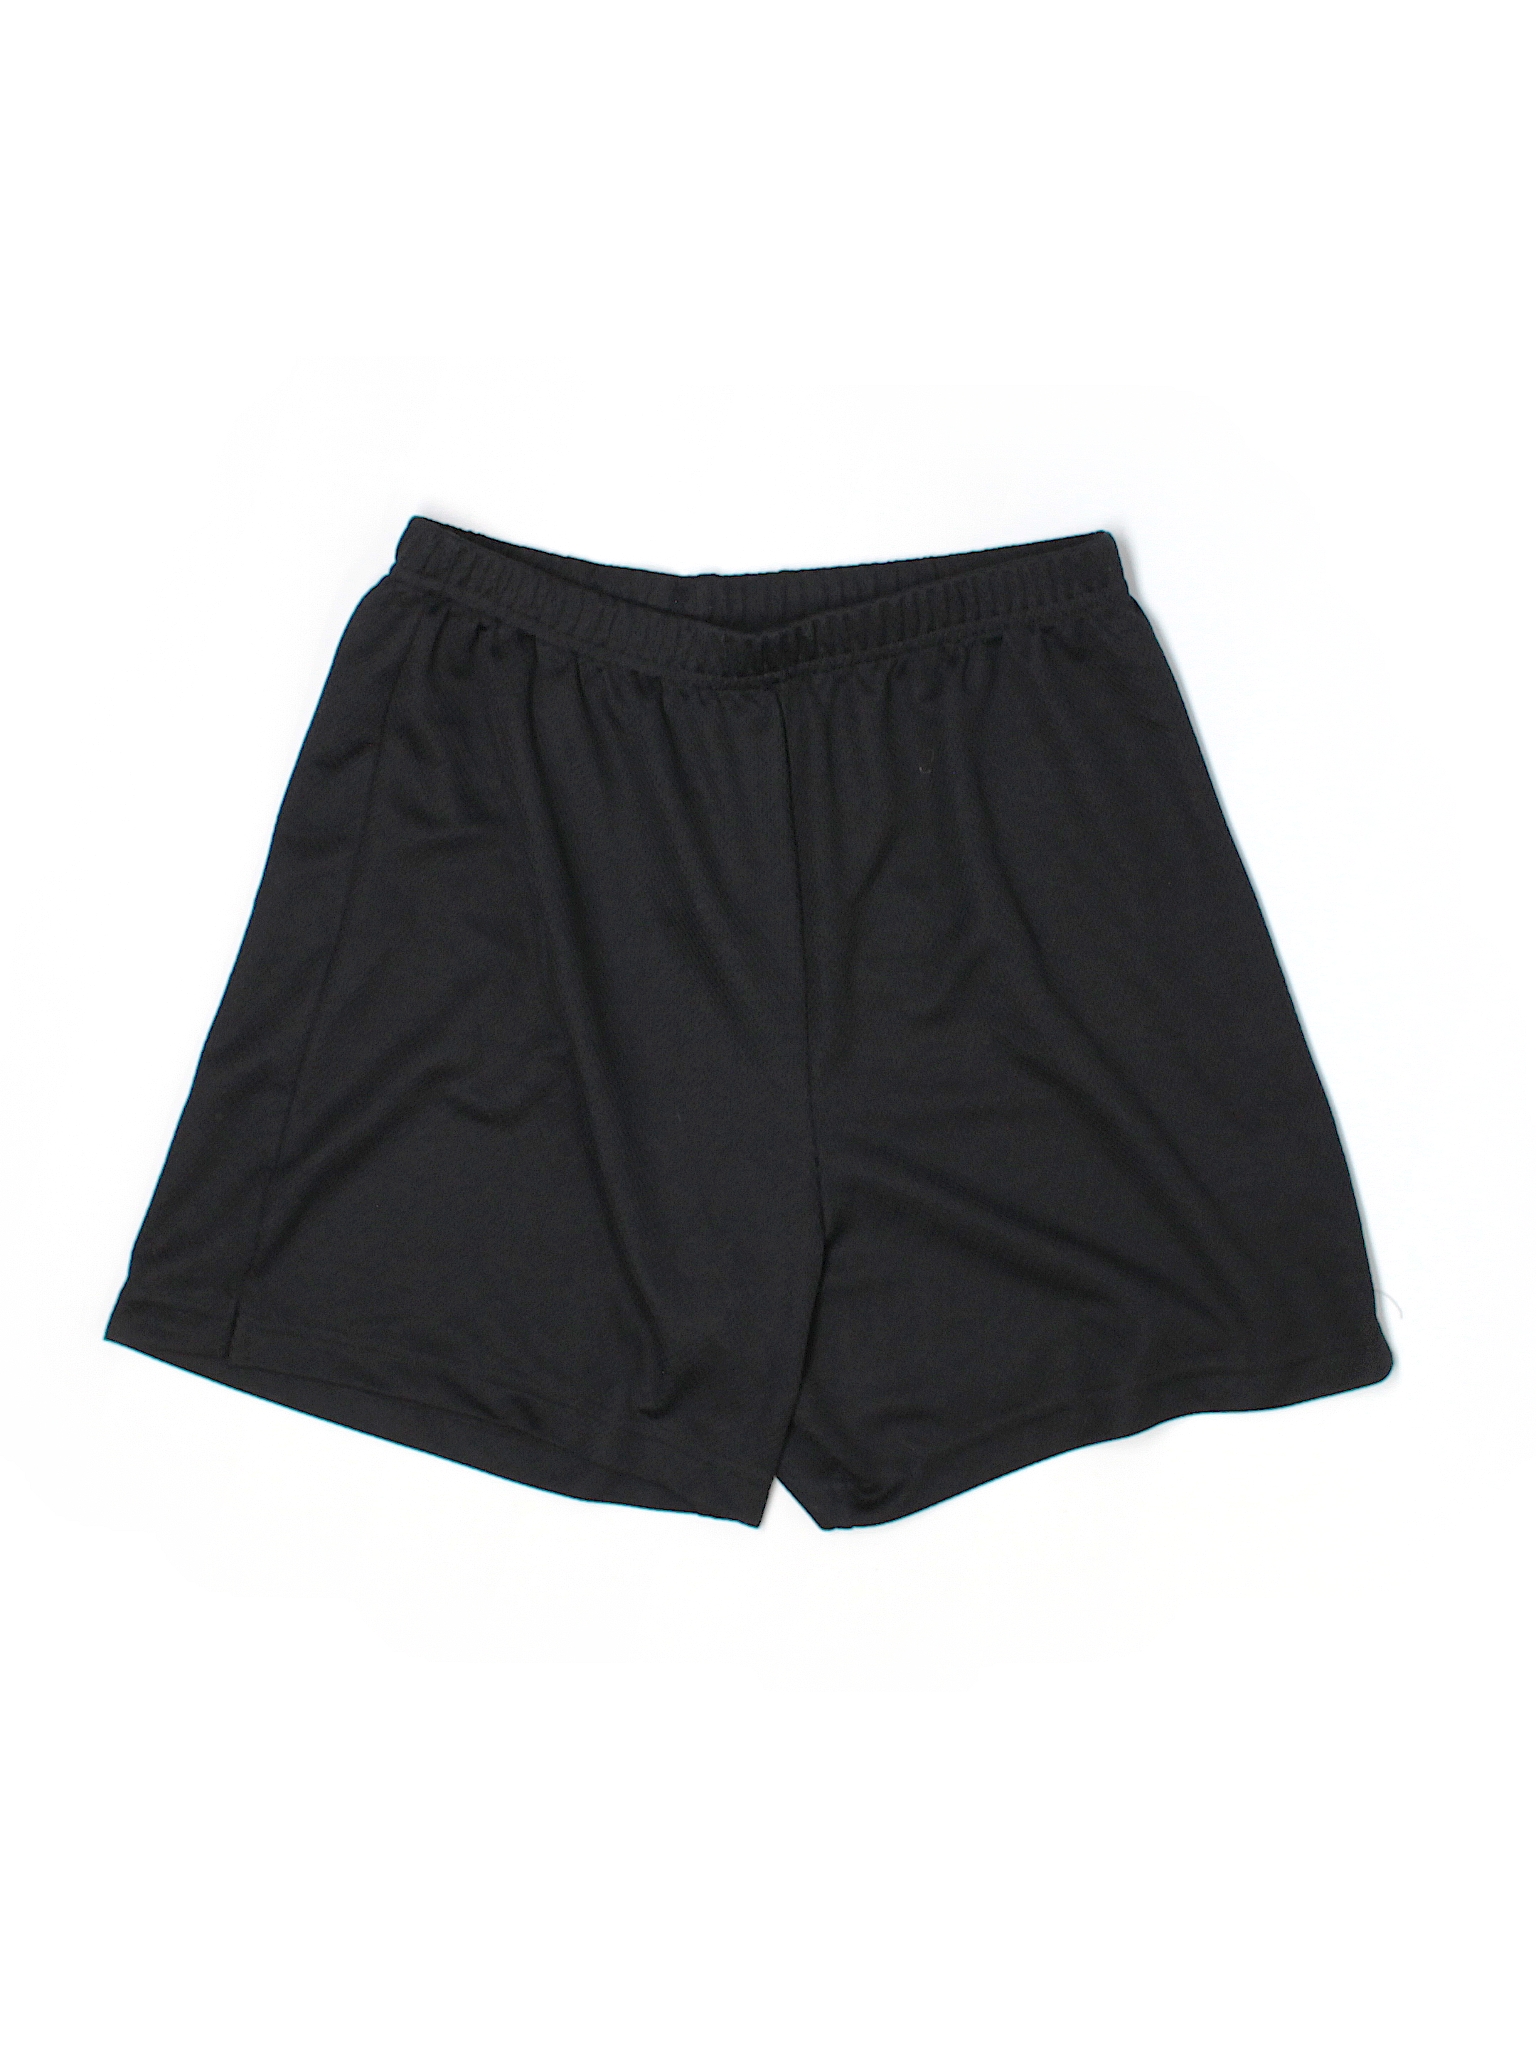 Athletic Works 100% Polyester Solid Black Athletic Shorts Size M - 50% ...